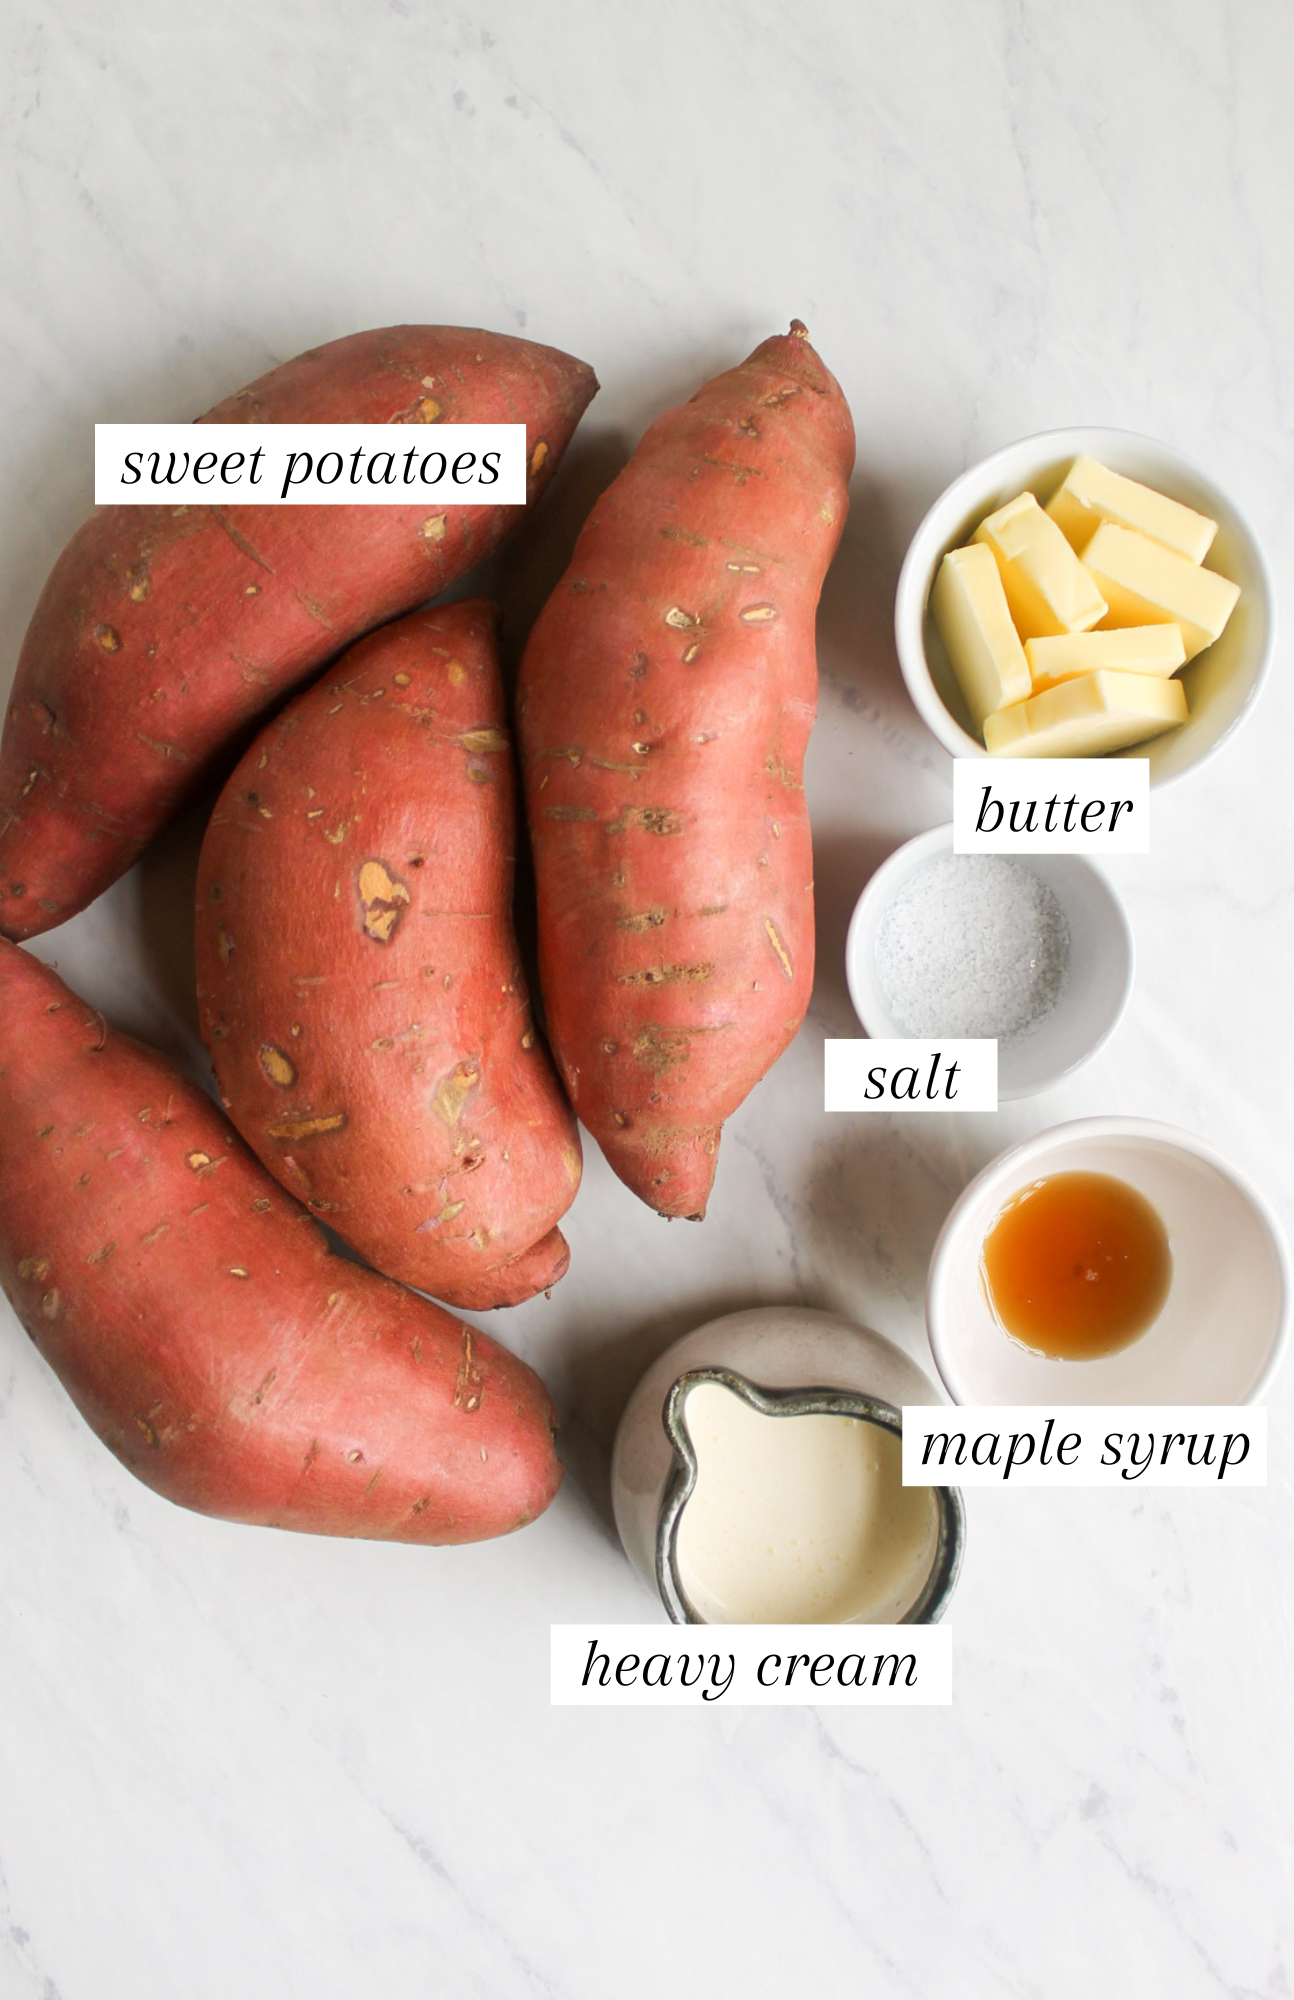 Labeled ingredients for Mashed Sweet Potatoes.